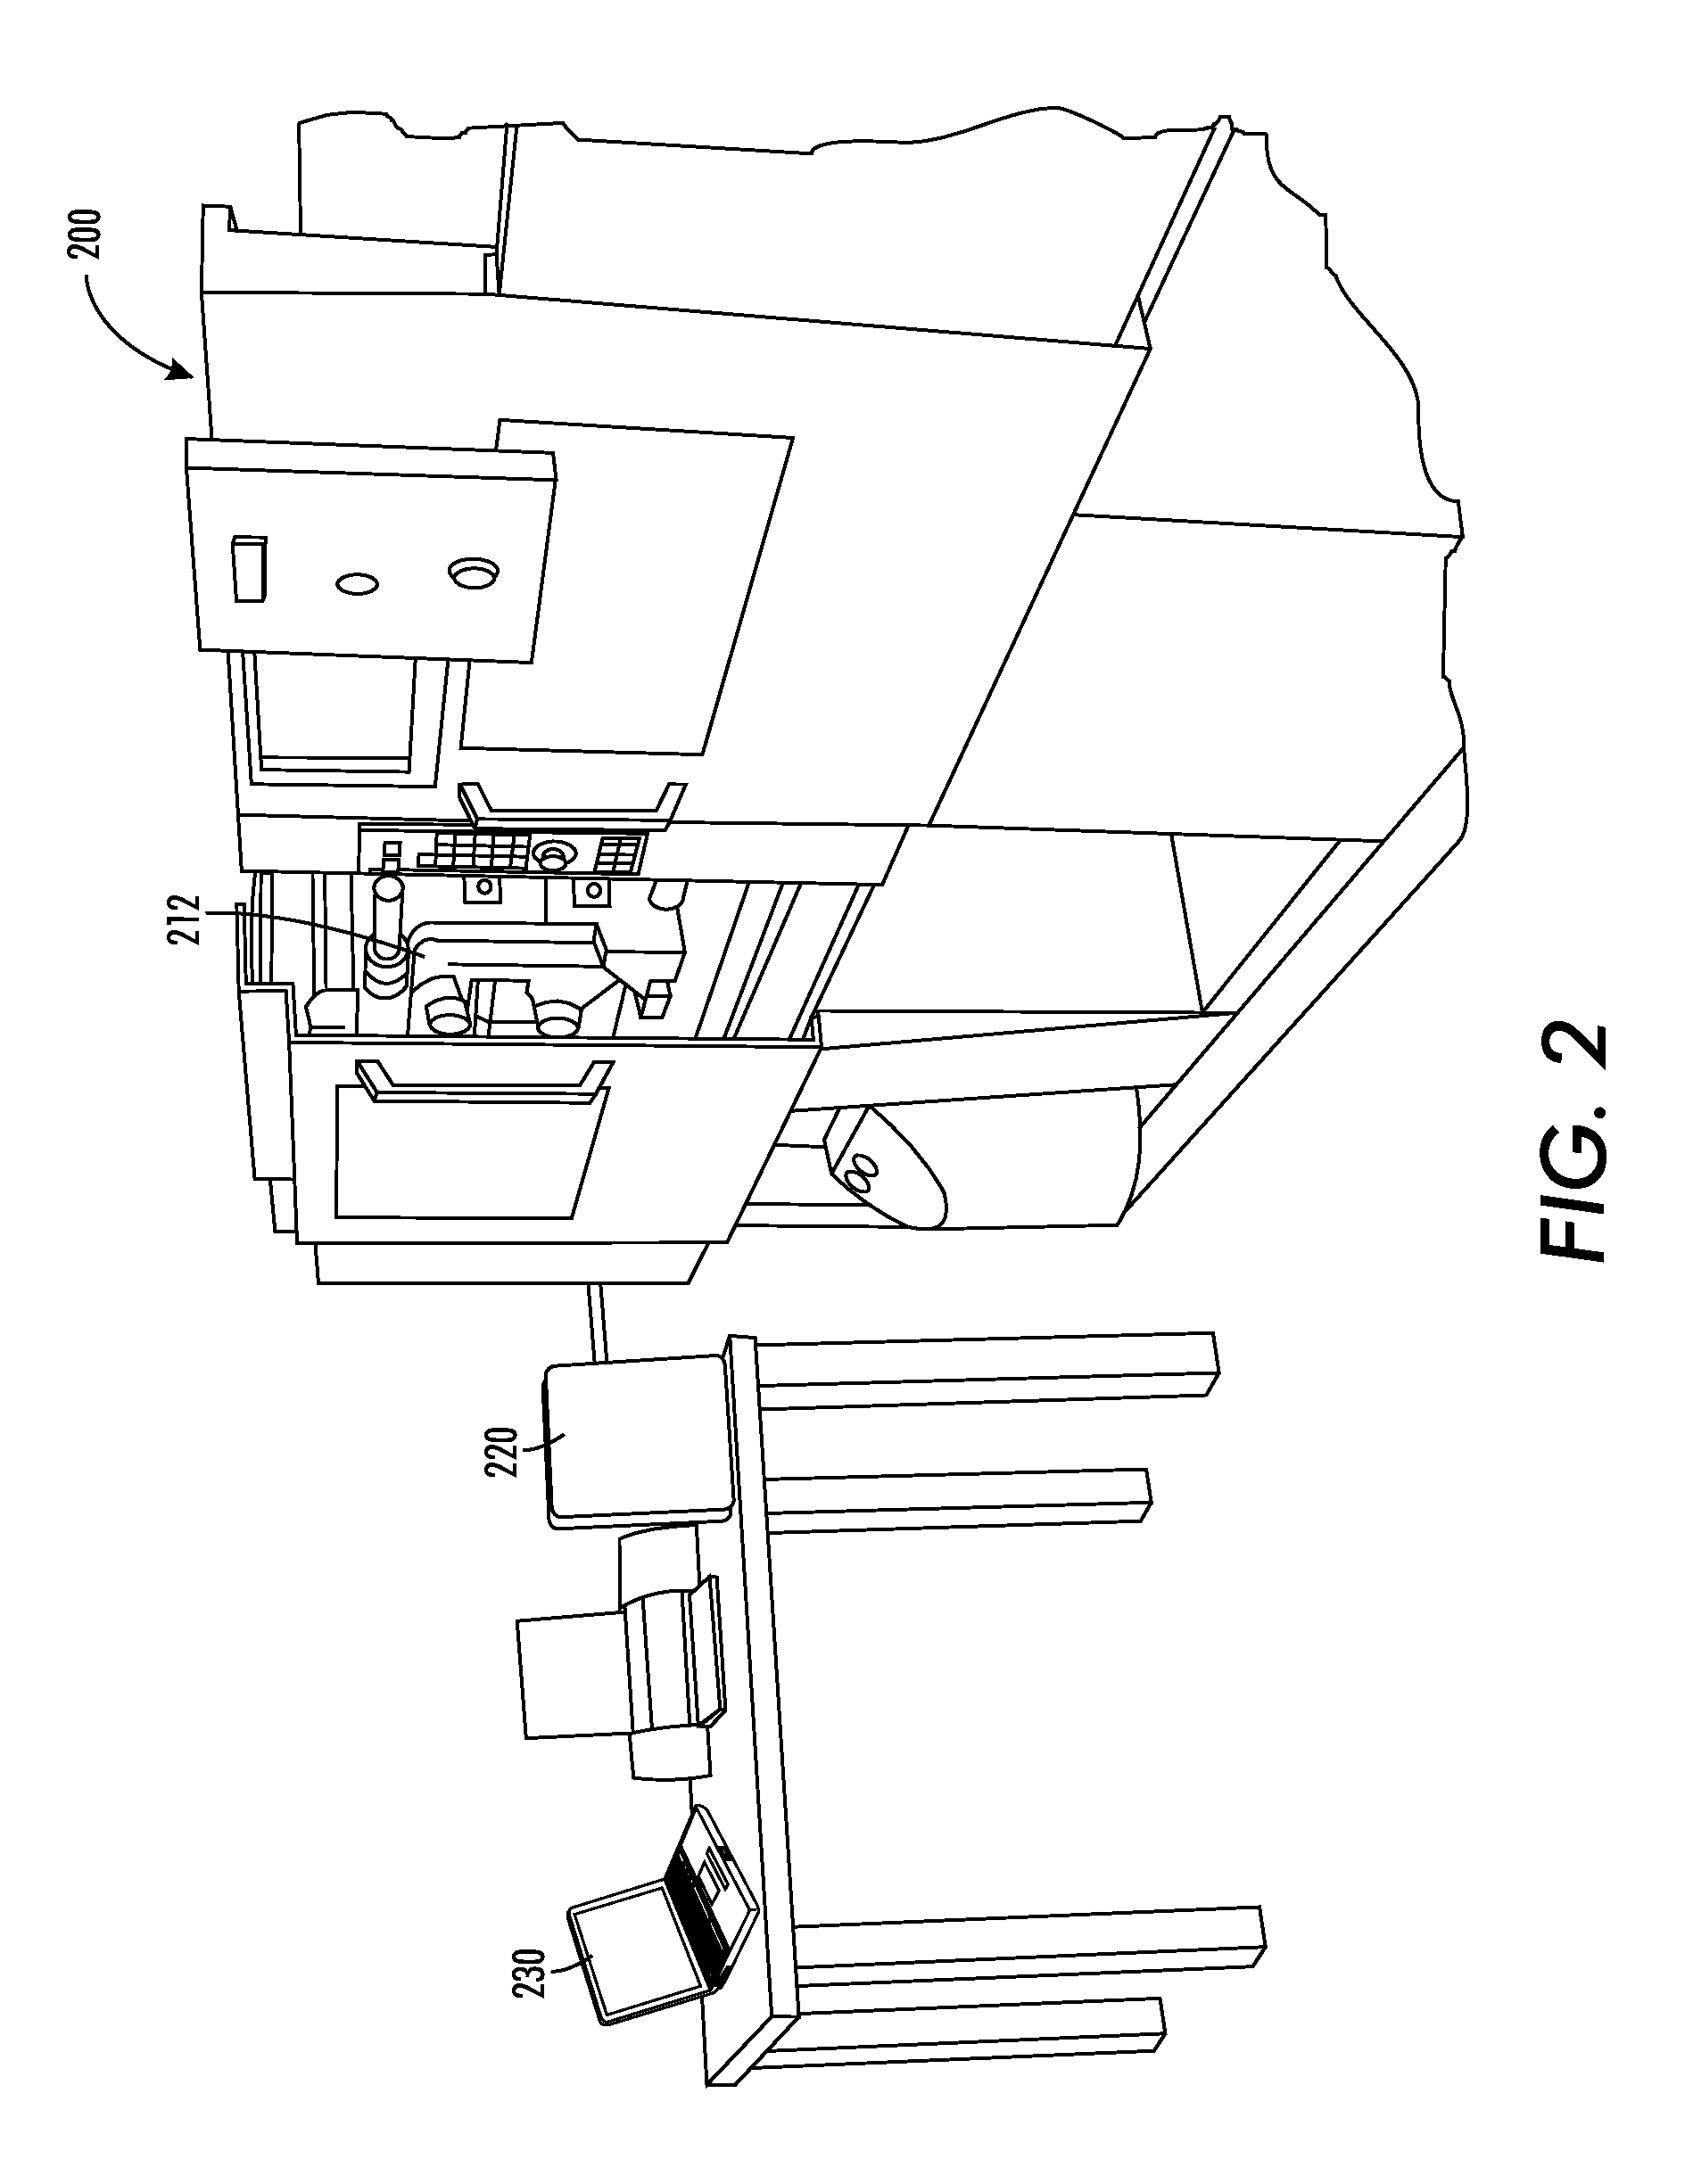 System for monitoring temperature and pressure during a molding process